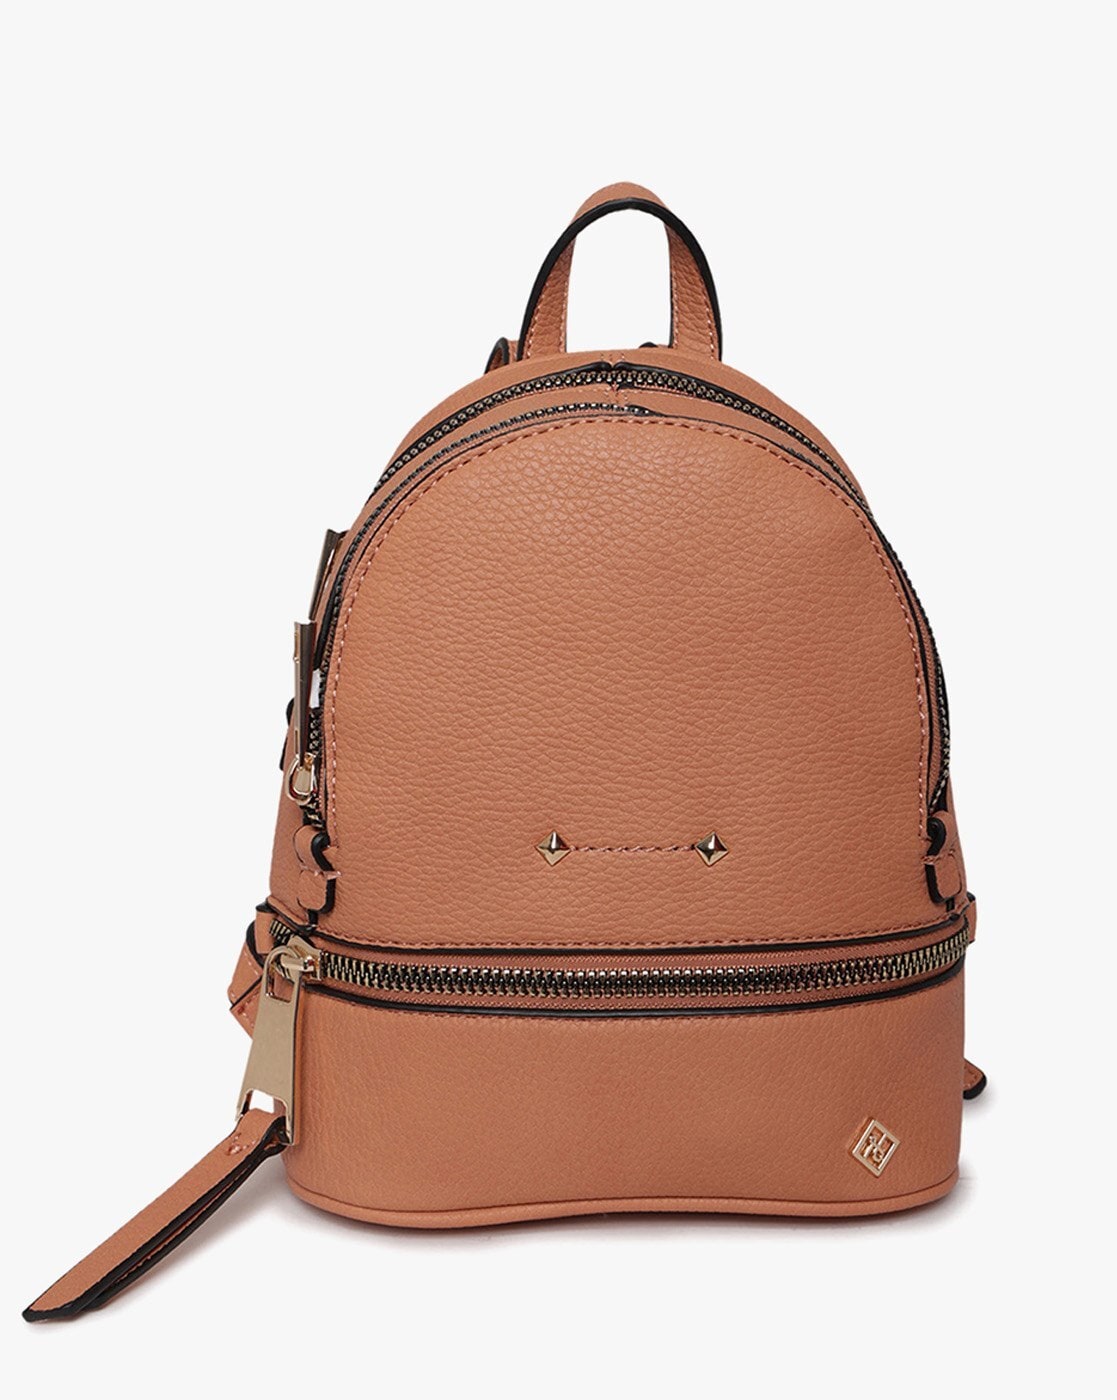 Buy HOOM Classic Casual Studded PU Leather Unisex School Student Laptop  Backpack Suits for Camping(Tangerine Orange) Online at Low Prices in India  - Paytmmall.com